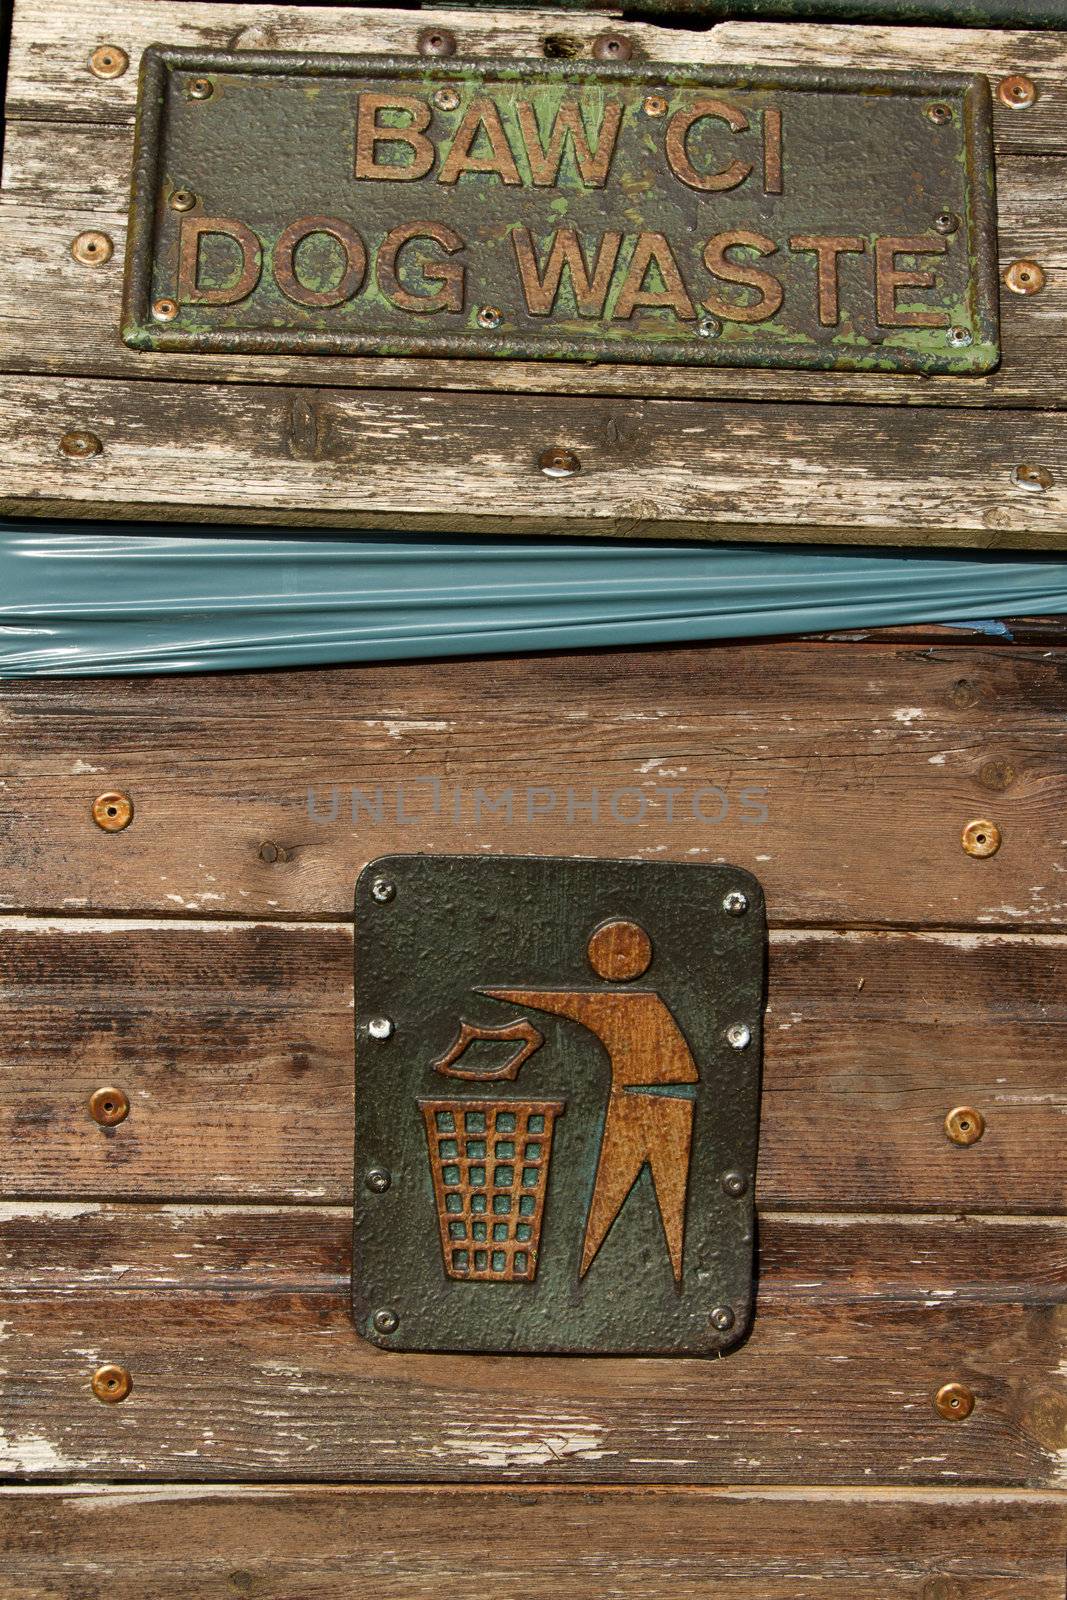 A pair of metal signs on a wooden bin showing a figure putting litter in a bin and the words 'DOG WASTE'.